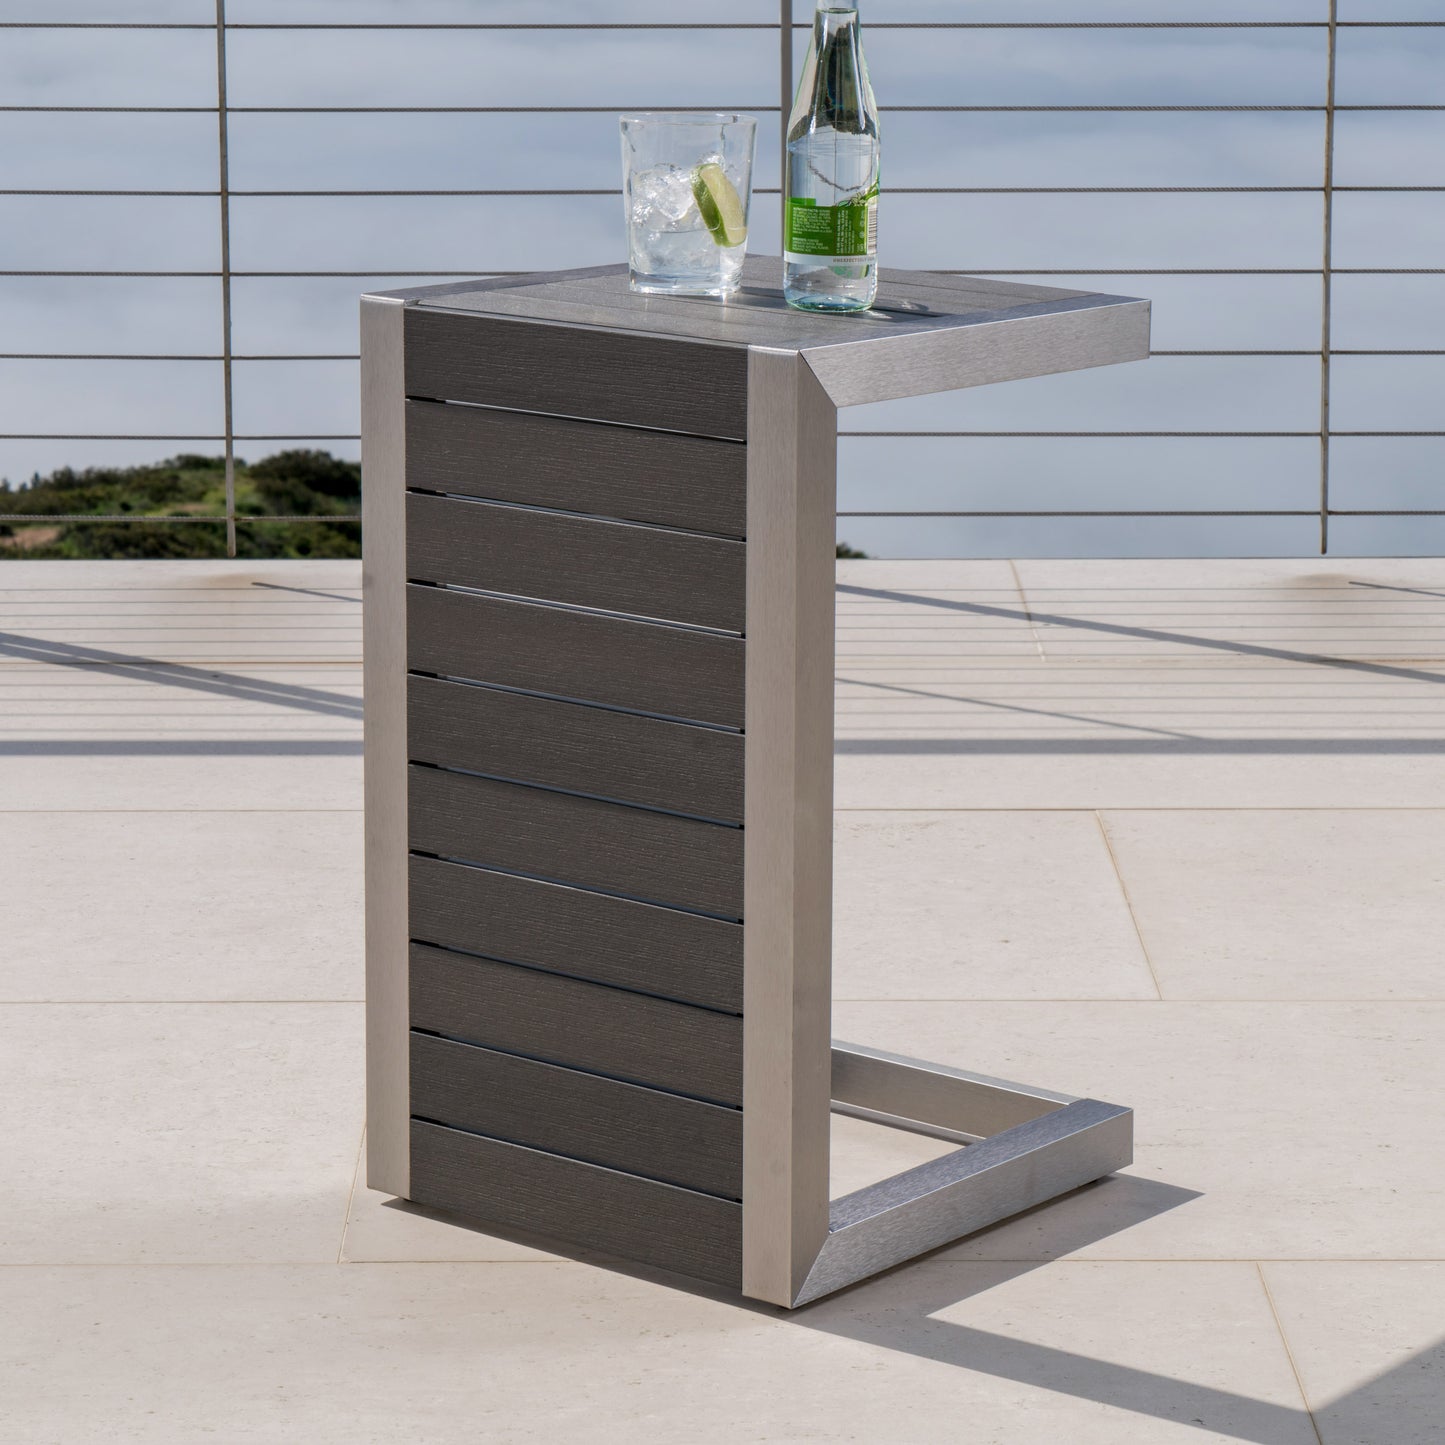 Crested-Bay Modern Aluminum C-Shaped End Table